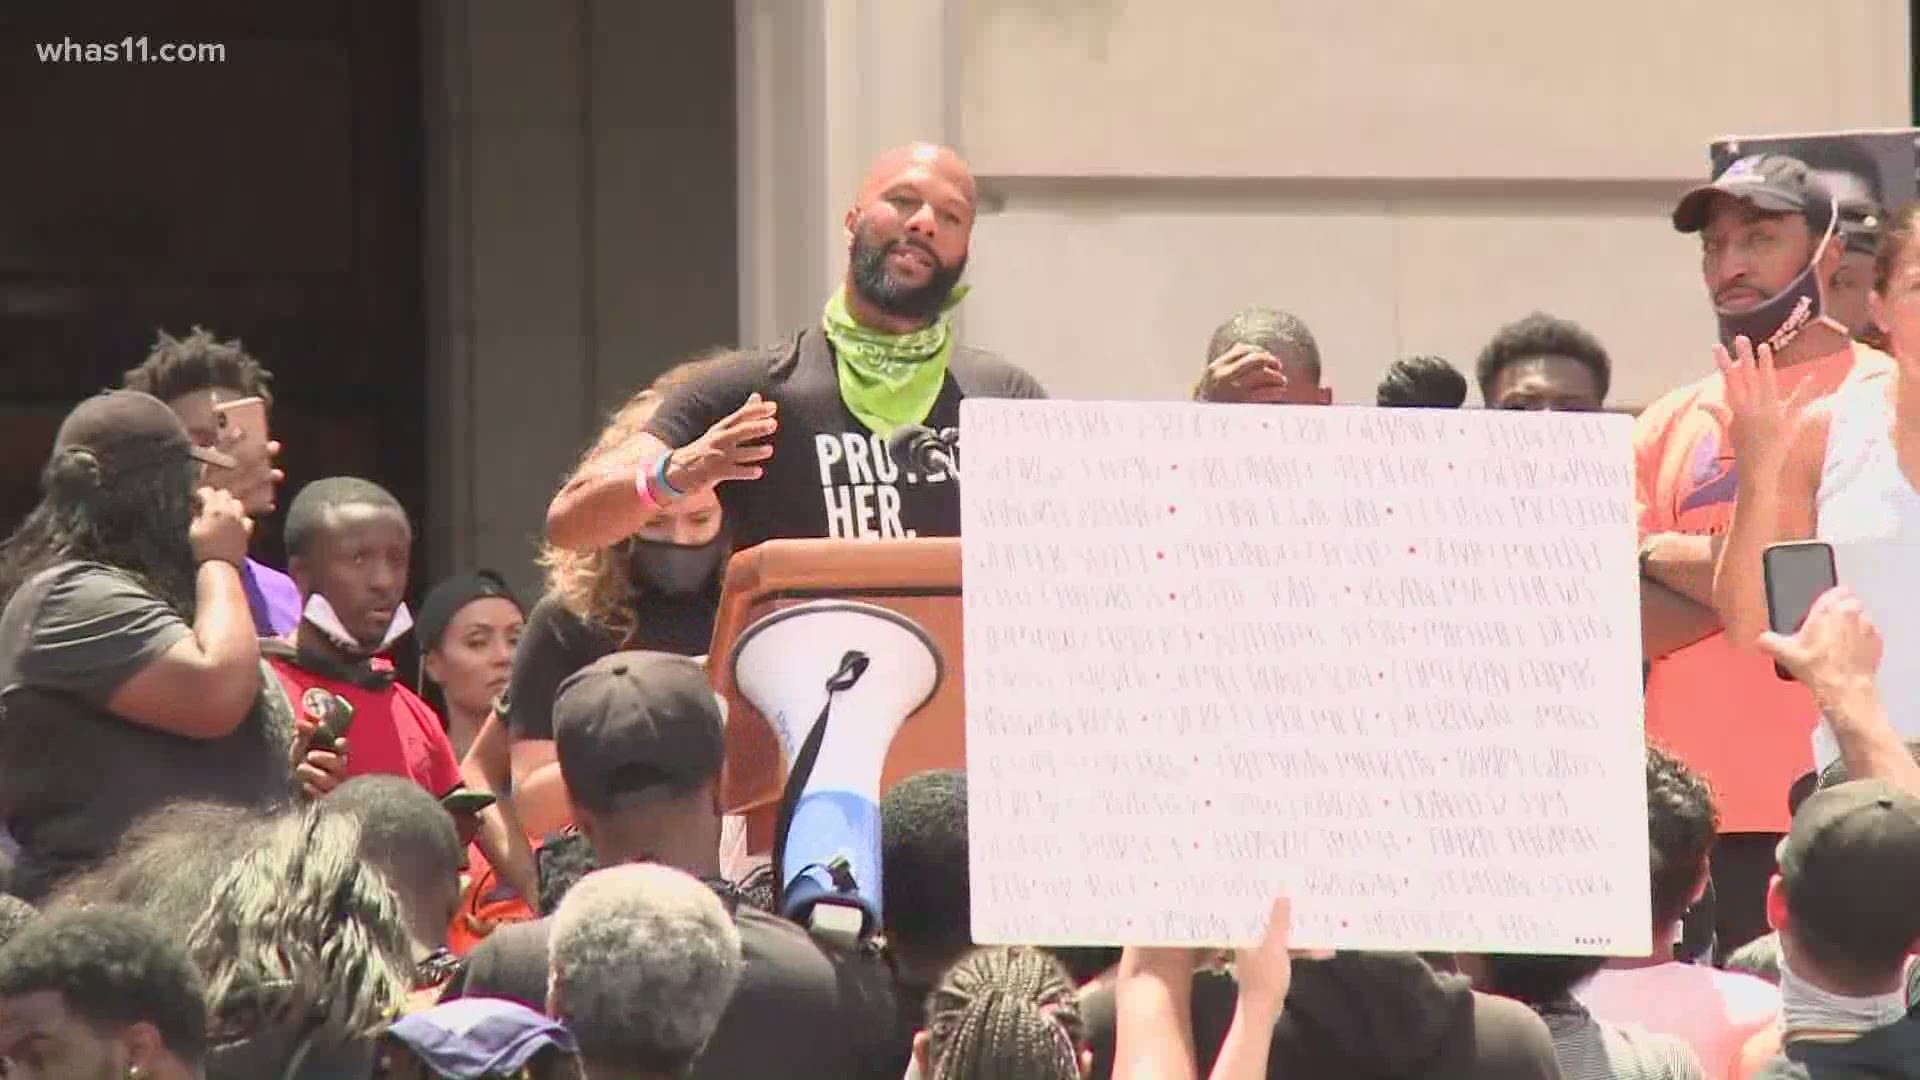 June 16, 2020 | A WHAS11 editor put together Common's words and moments from the rally in Frankfort.